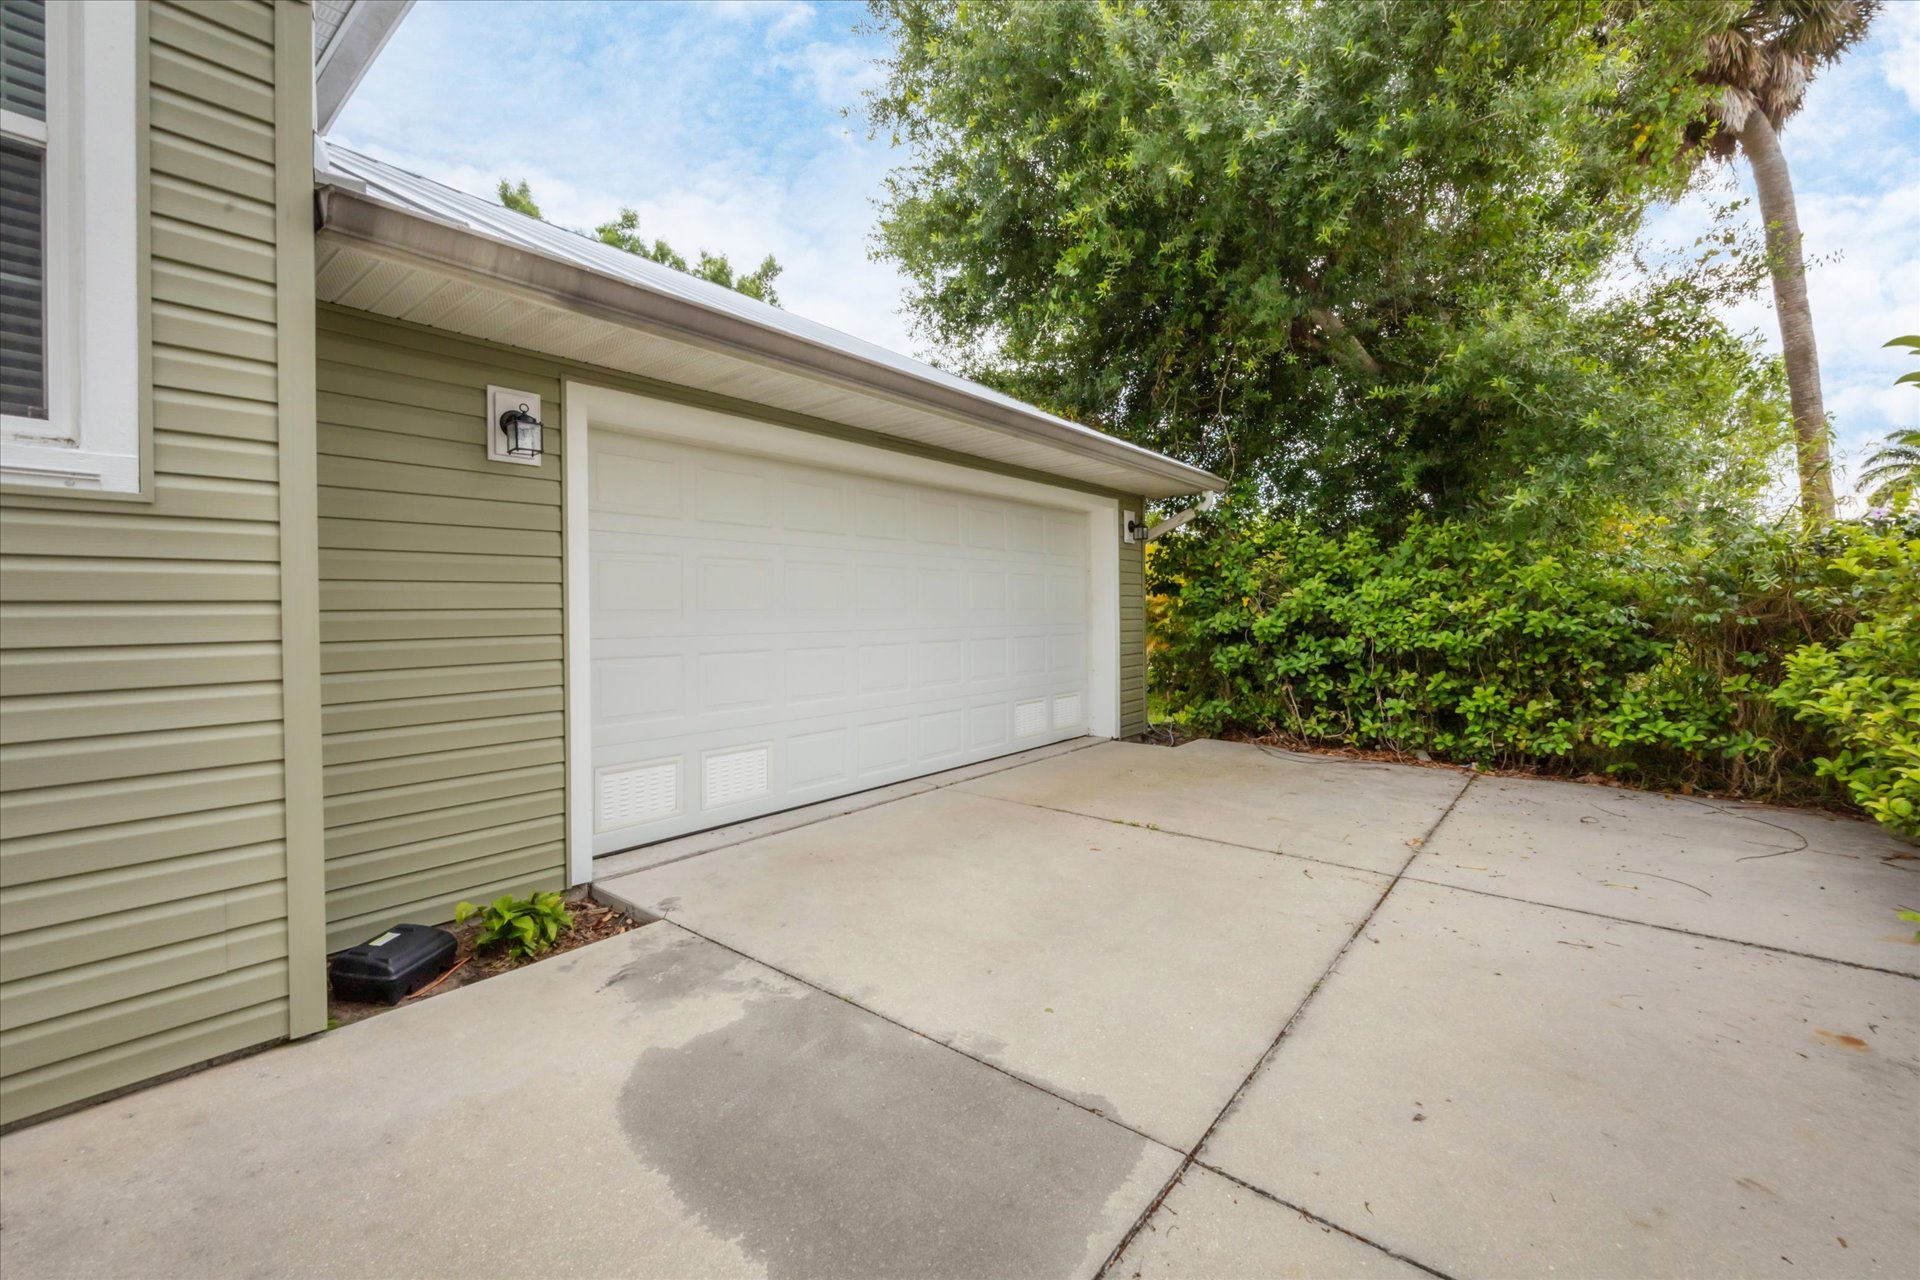 2 car garage with available parking